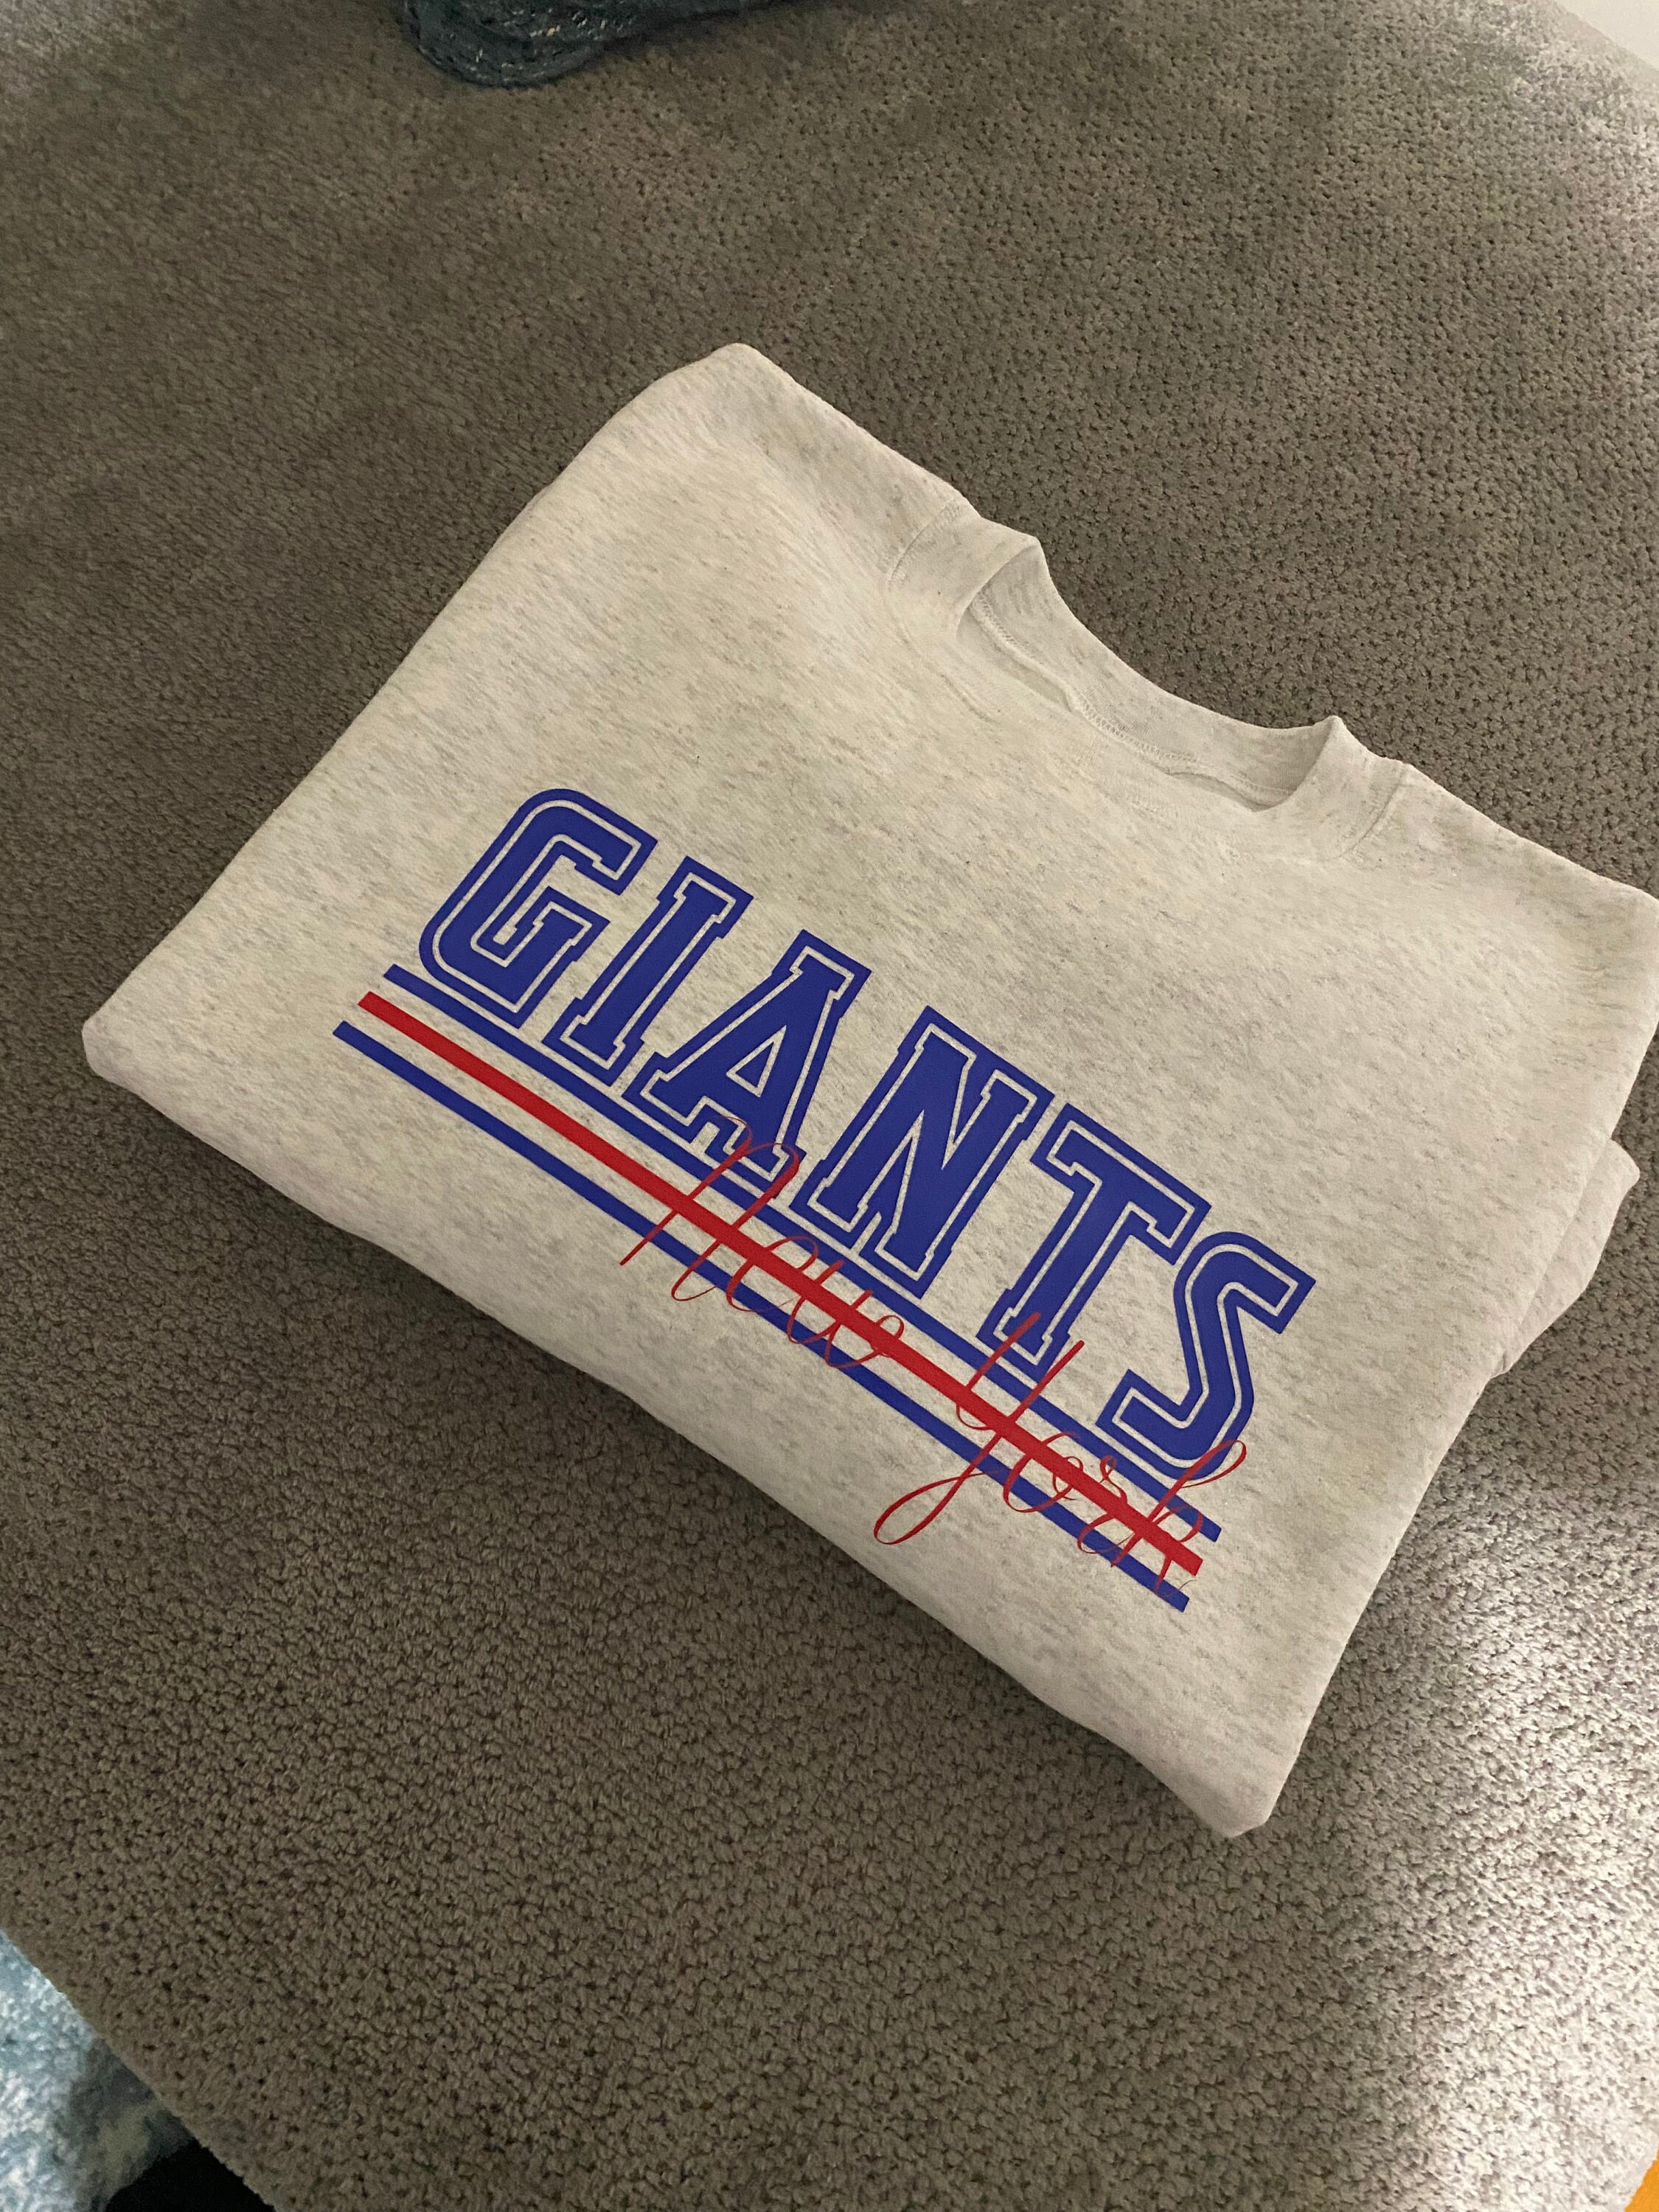 18% OFF New York Giants Hoodies Mens 3D Skull Place On Hand